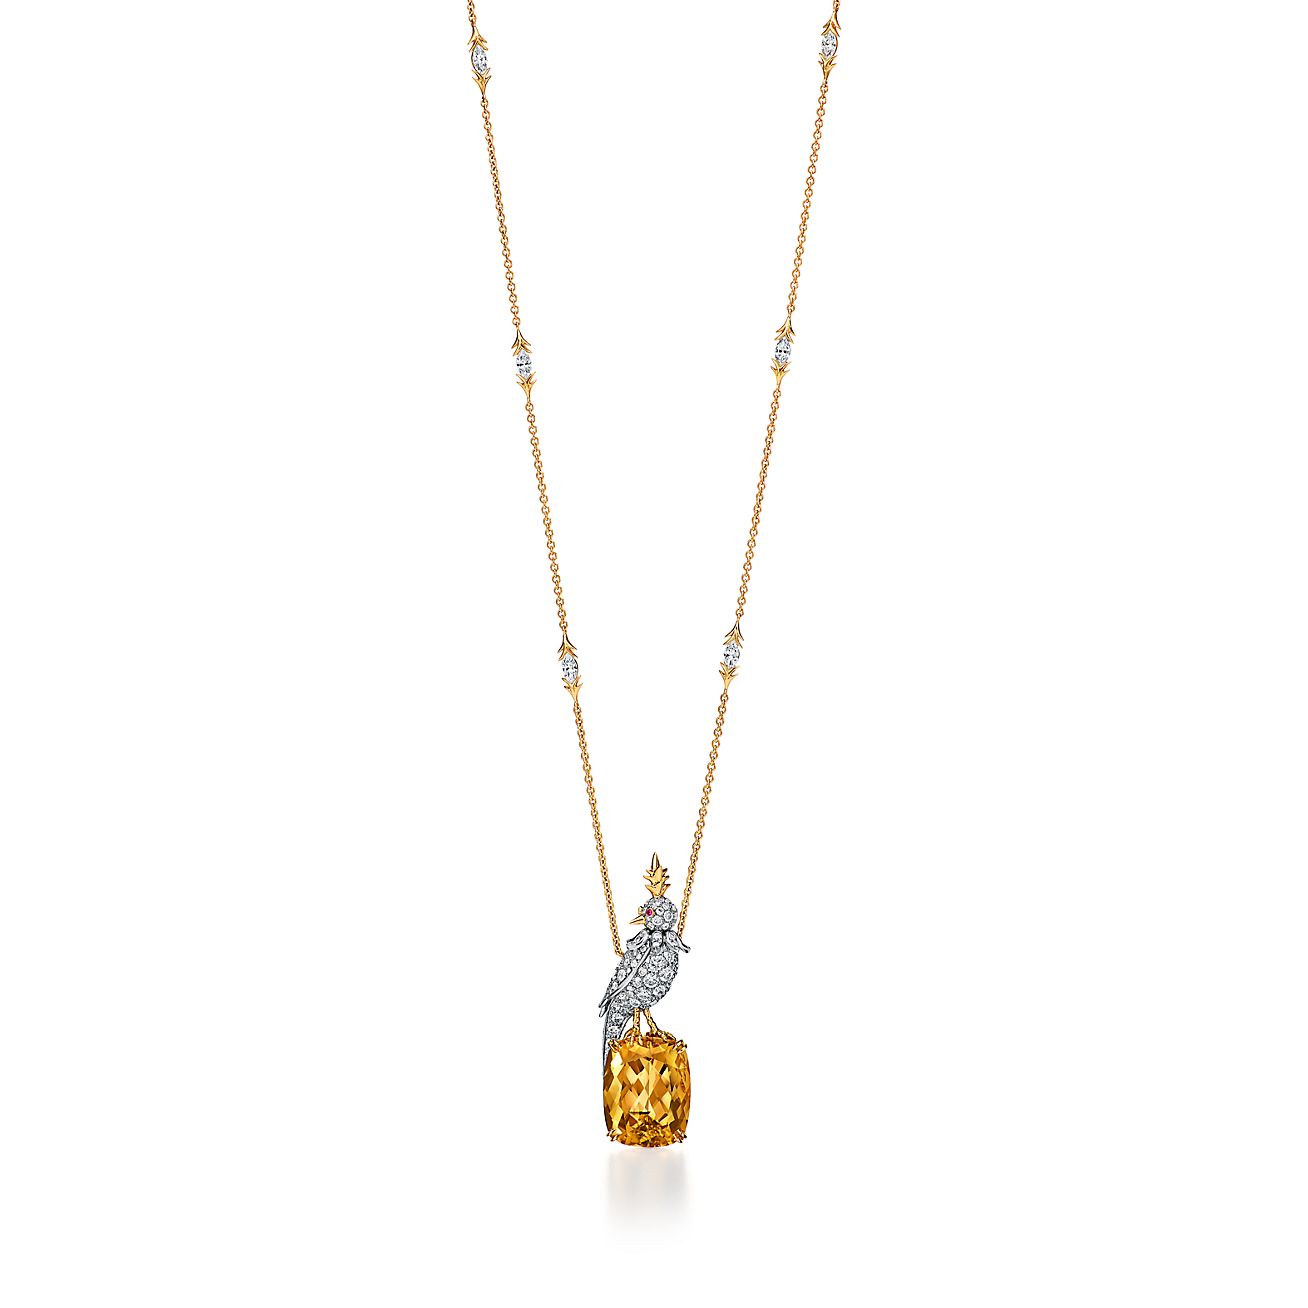 Pendant in Yellow Gold and Platinum with a Citrine, Diamonds and